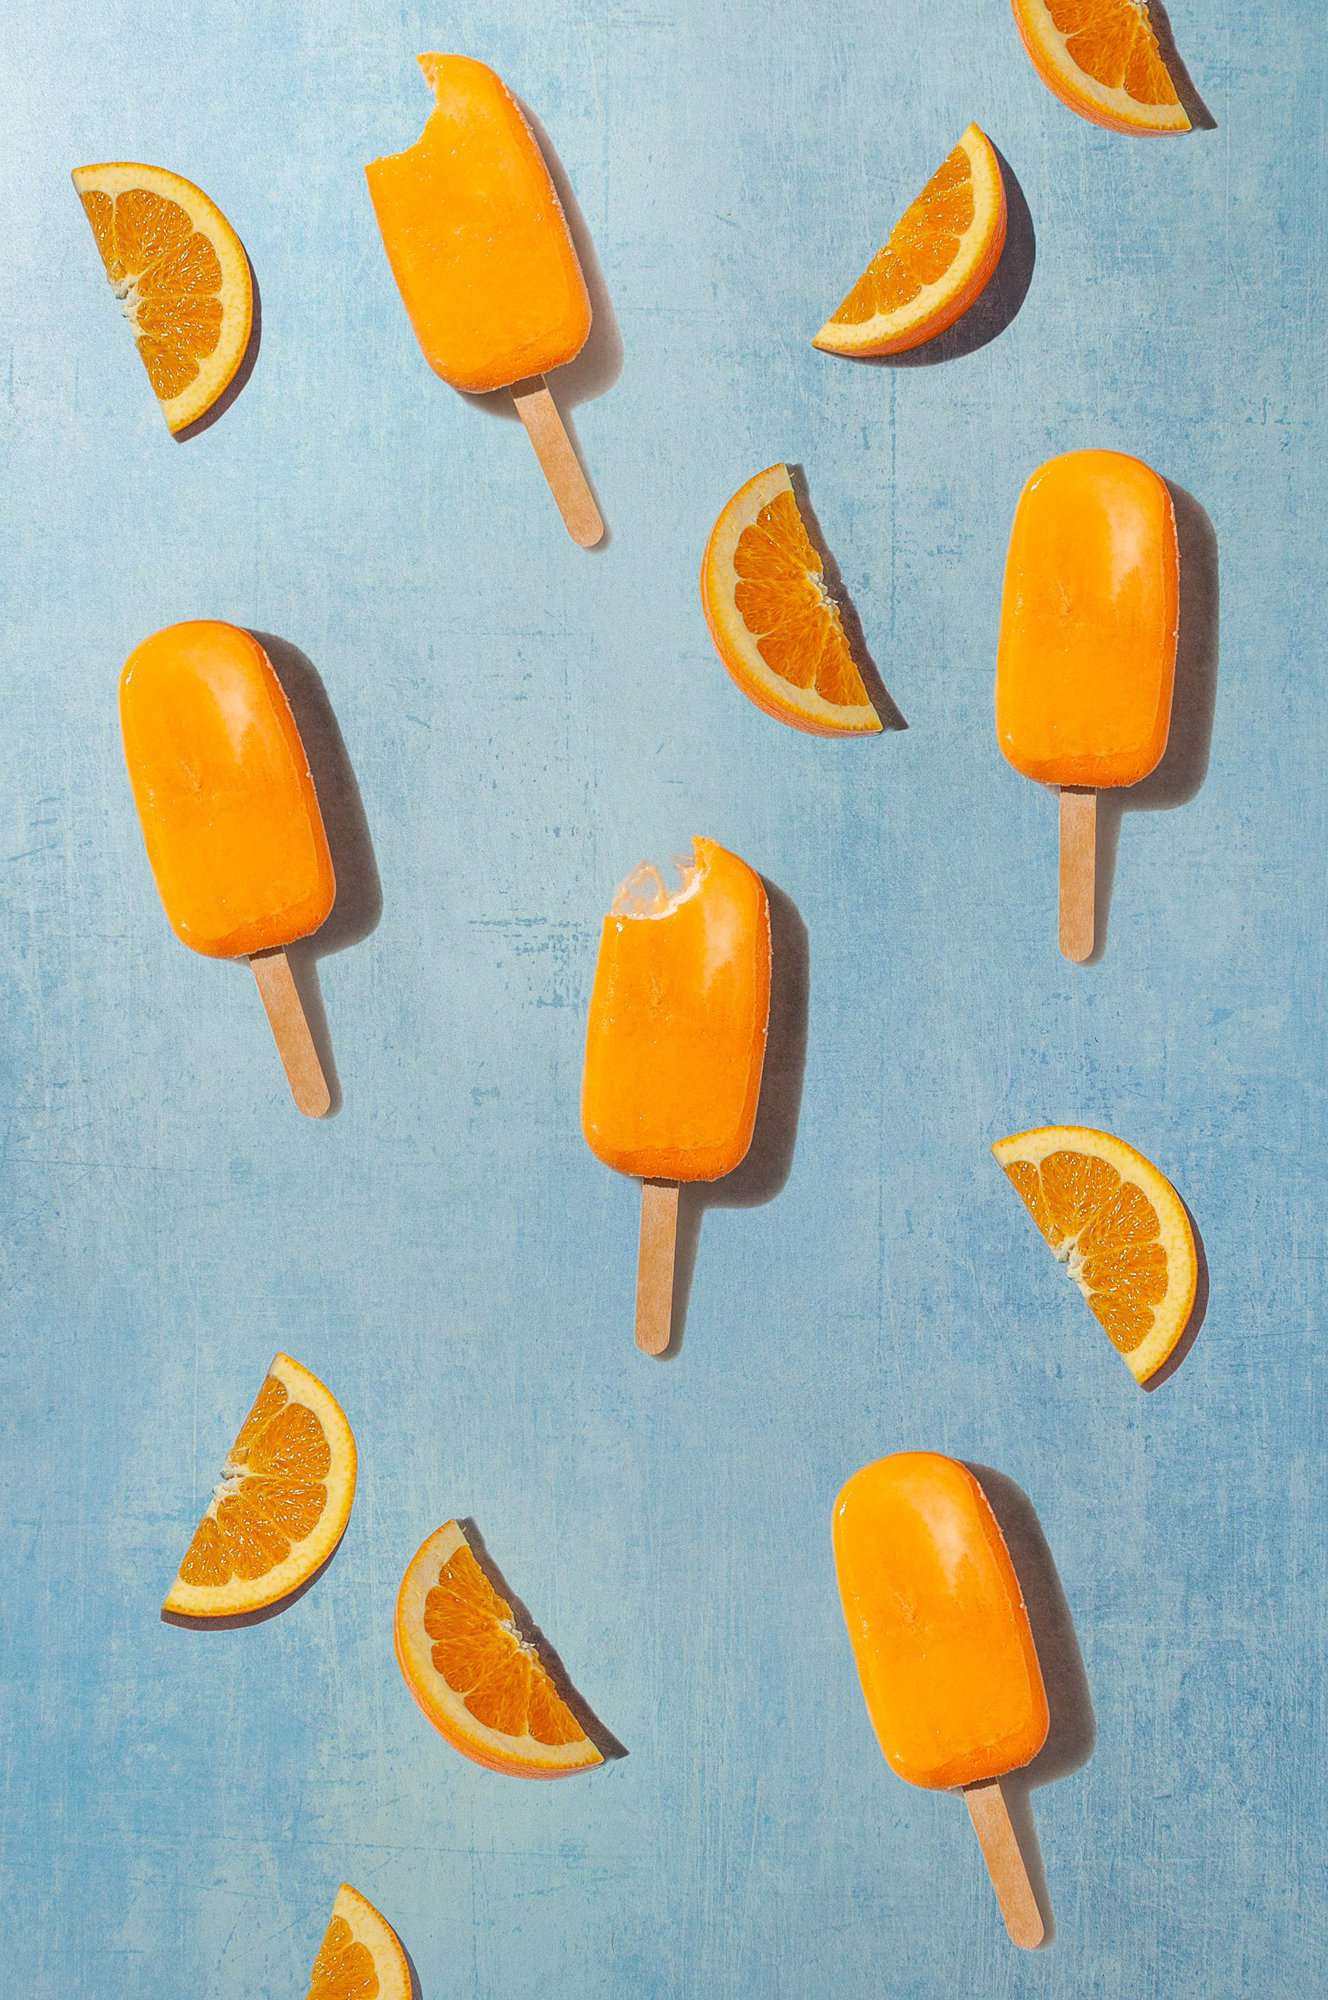 pattern with five orange creamsicle popsicles and orange slices